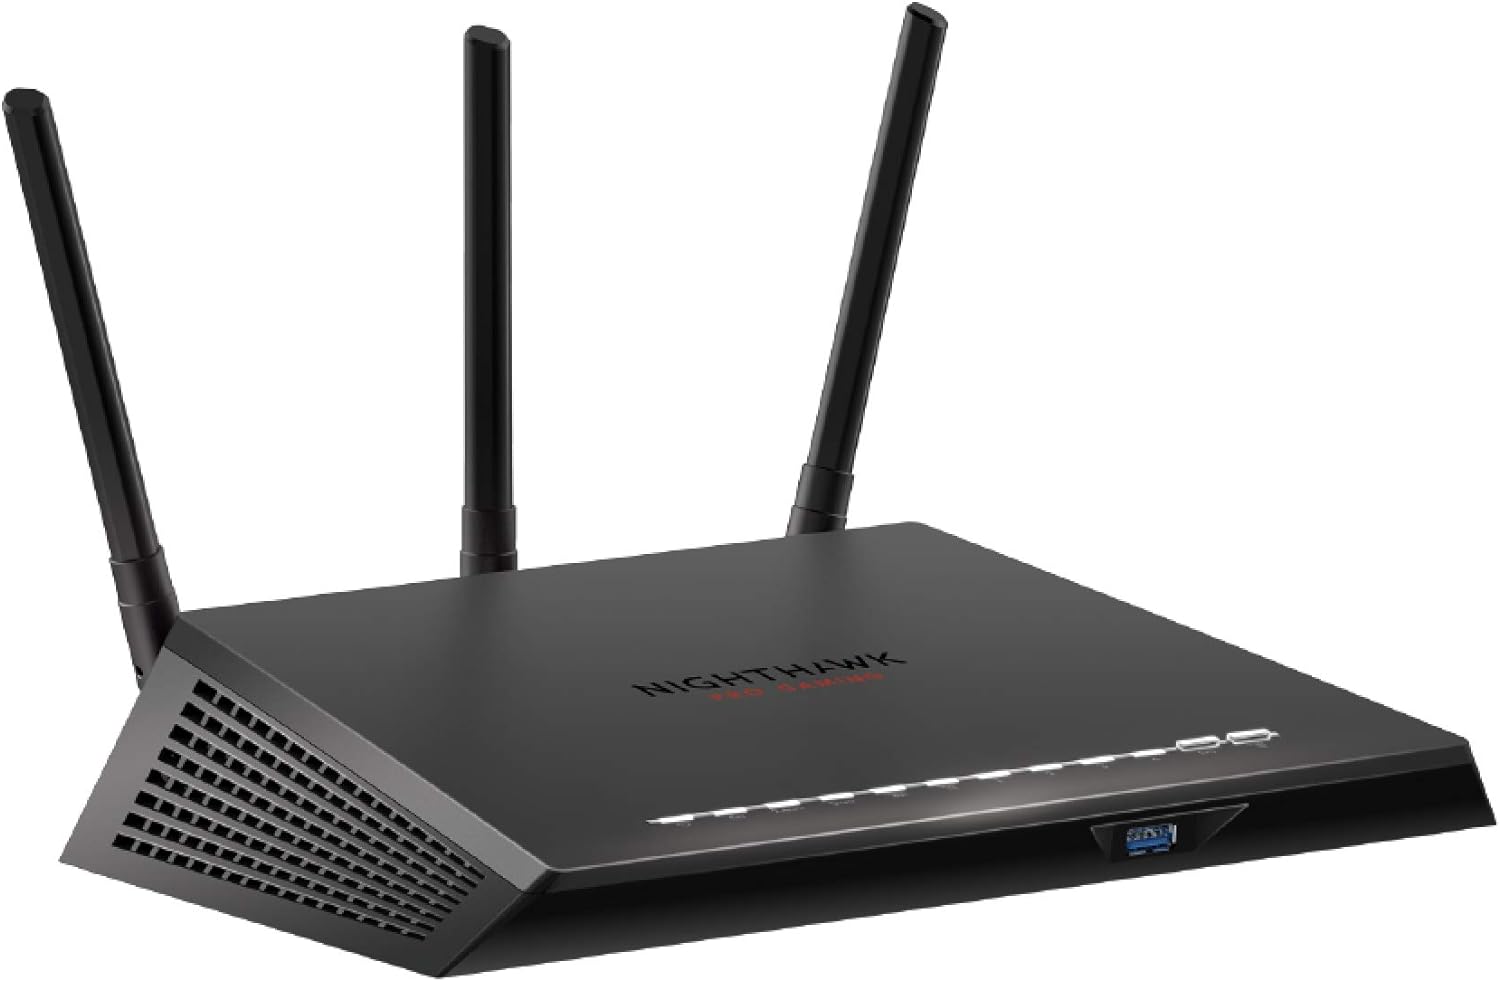 NETGEAR Nighthawk Pro Gaming ( XR300 ) WiFi Router with 4 Ethernet Ports and Wireless speeds up to 1.75 Gbps, AC1750, Optimized for Low ping